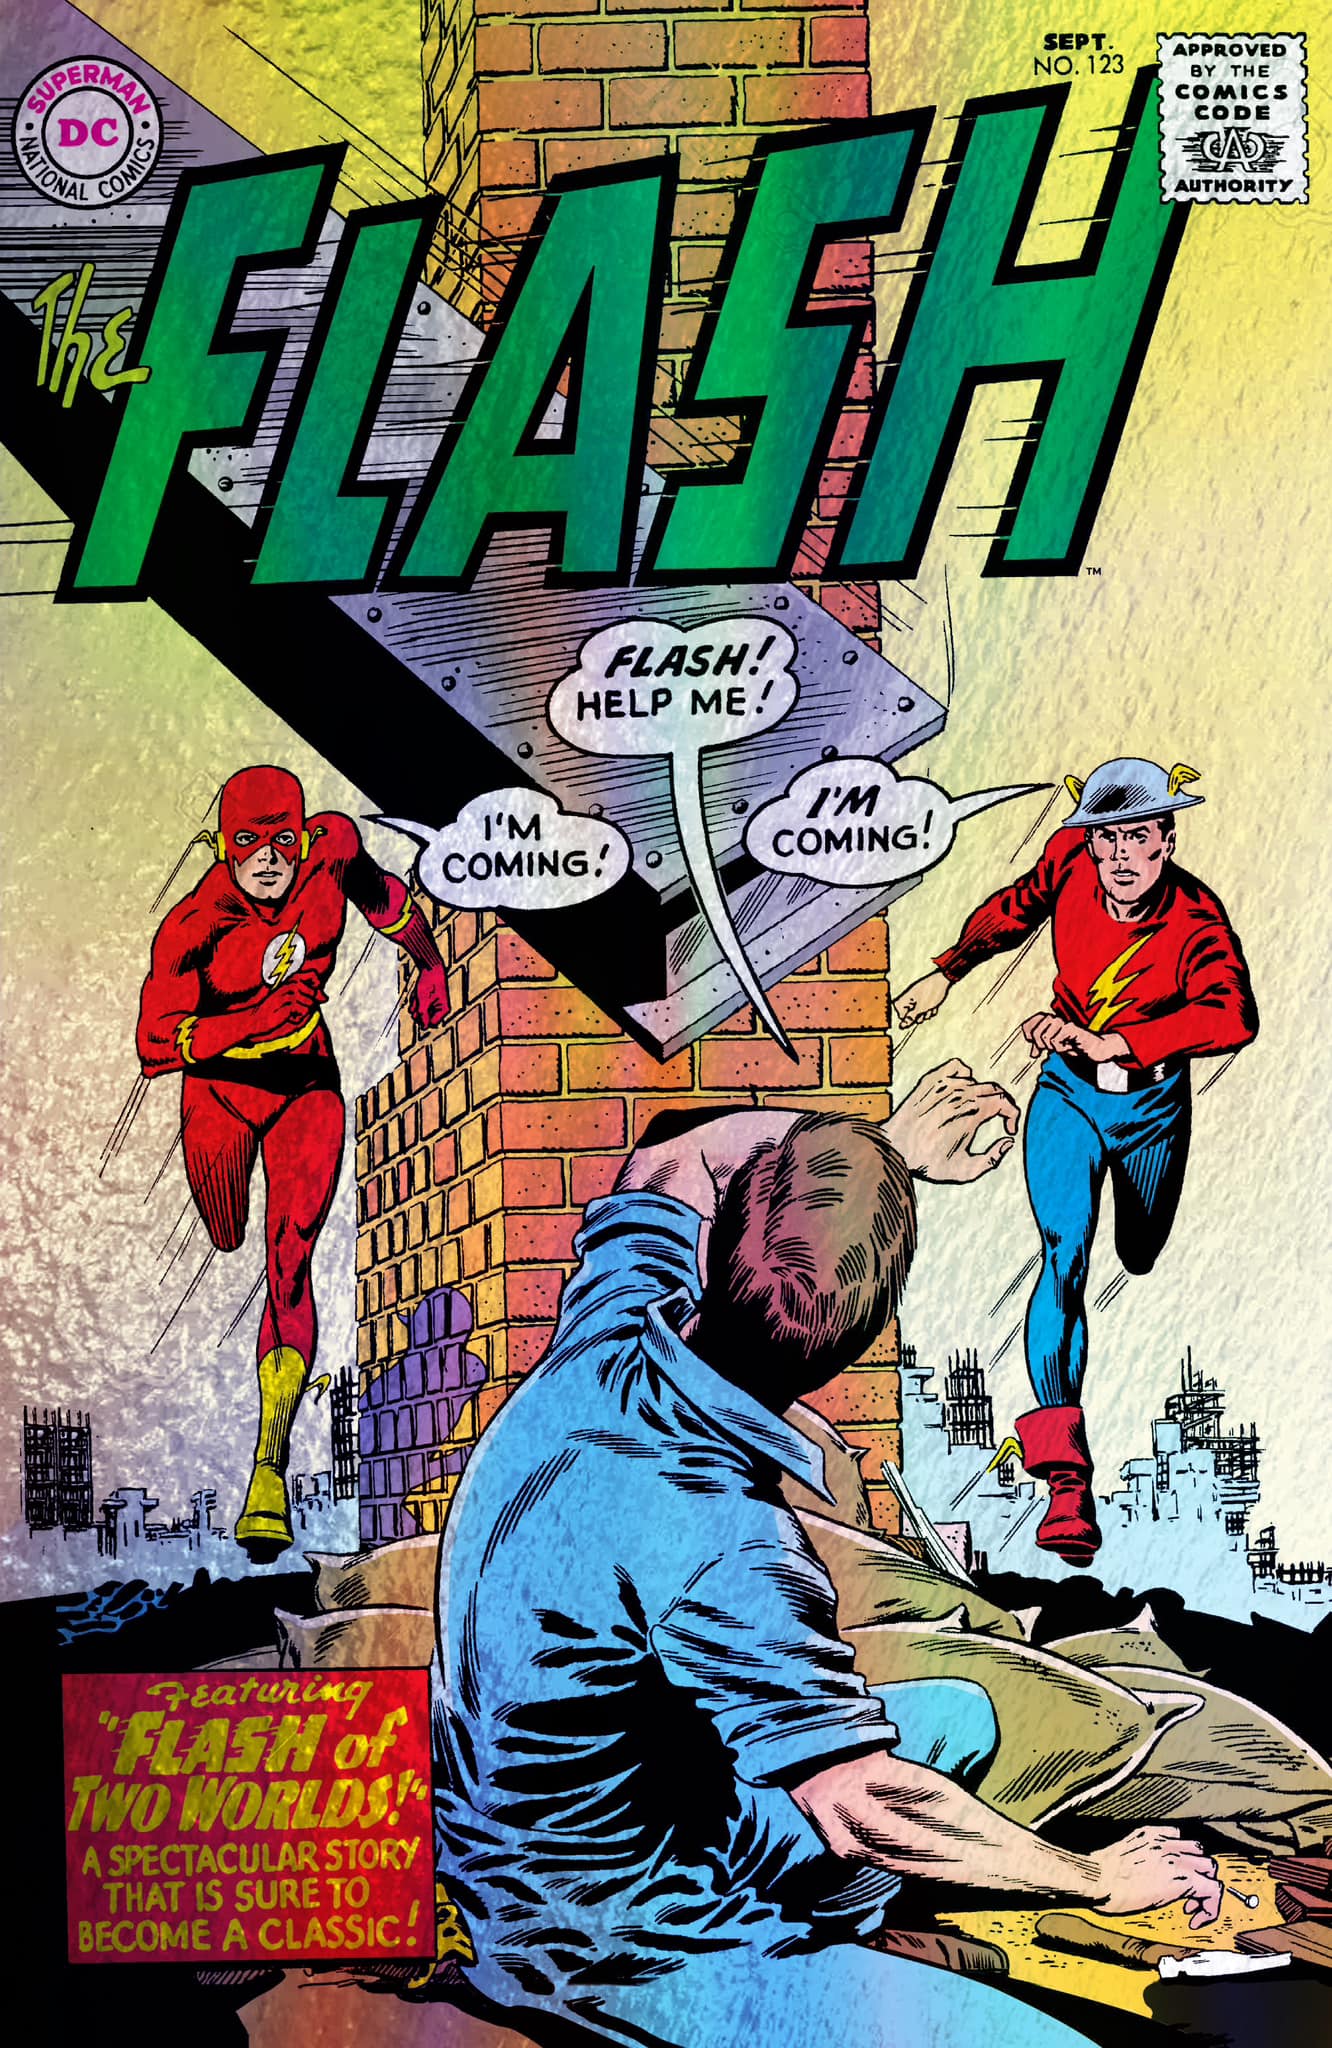 FLASH #123 MEGACON FOIL VARIANT LIMITED TO 1000 COPIES